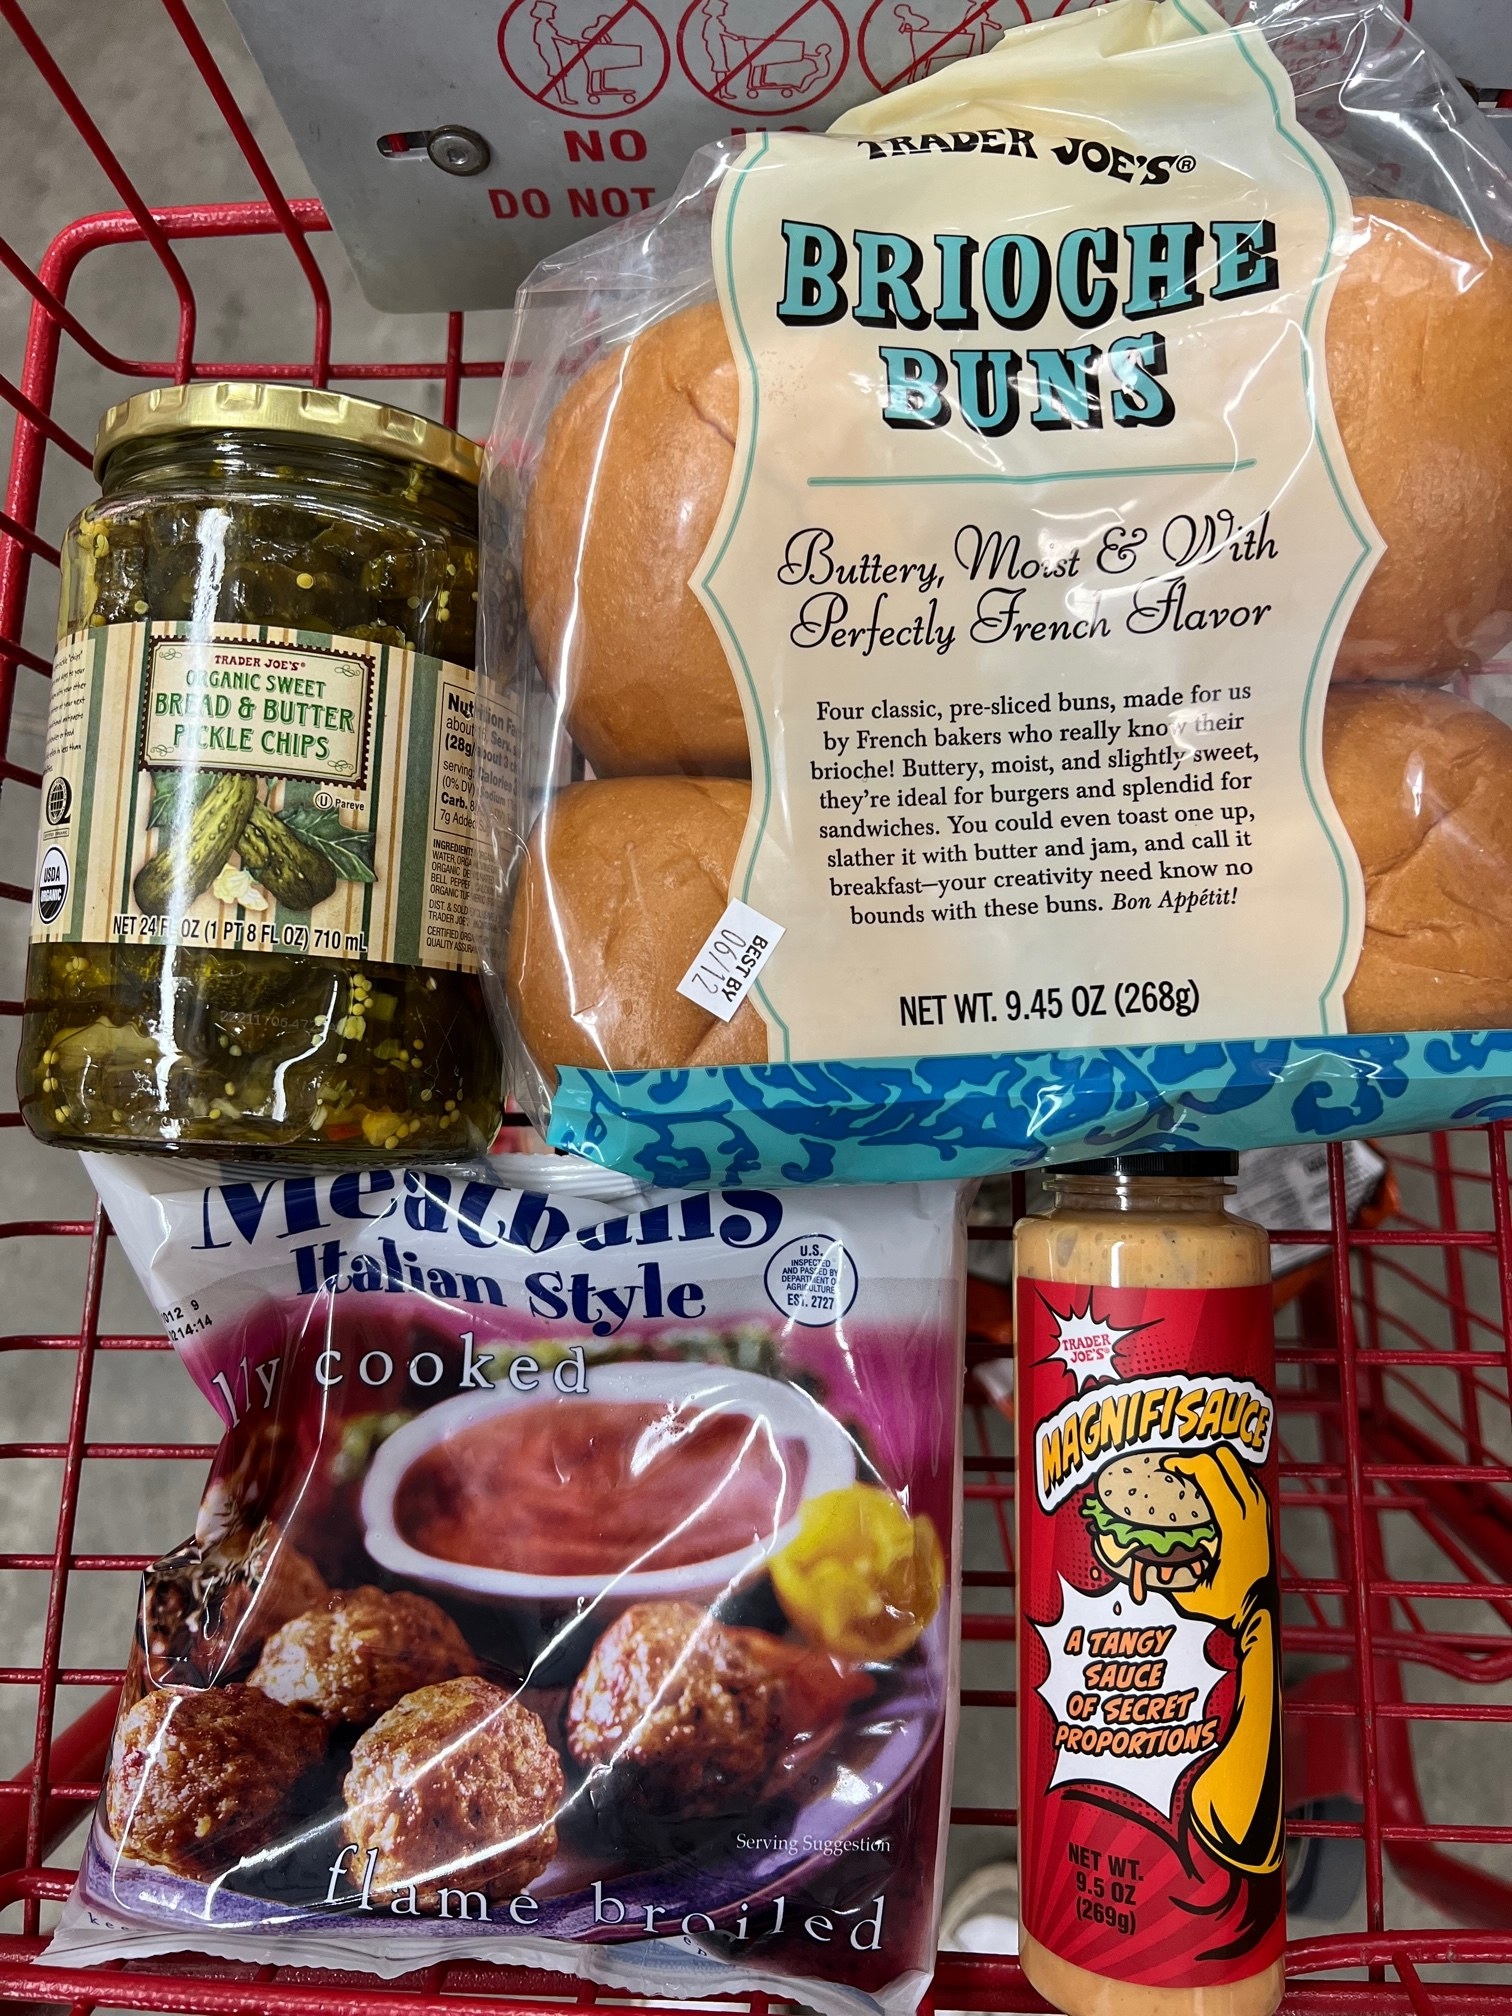 Brioche Buns + Bread &amp;amp; Butter Pickle Chips + Italian Style Cooked Meatballs + Magnifisauce